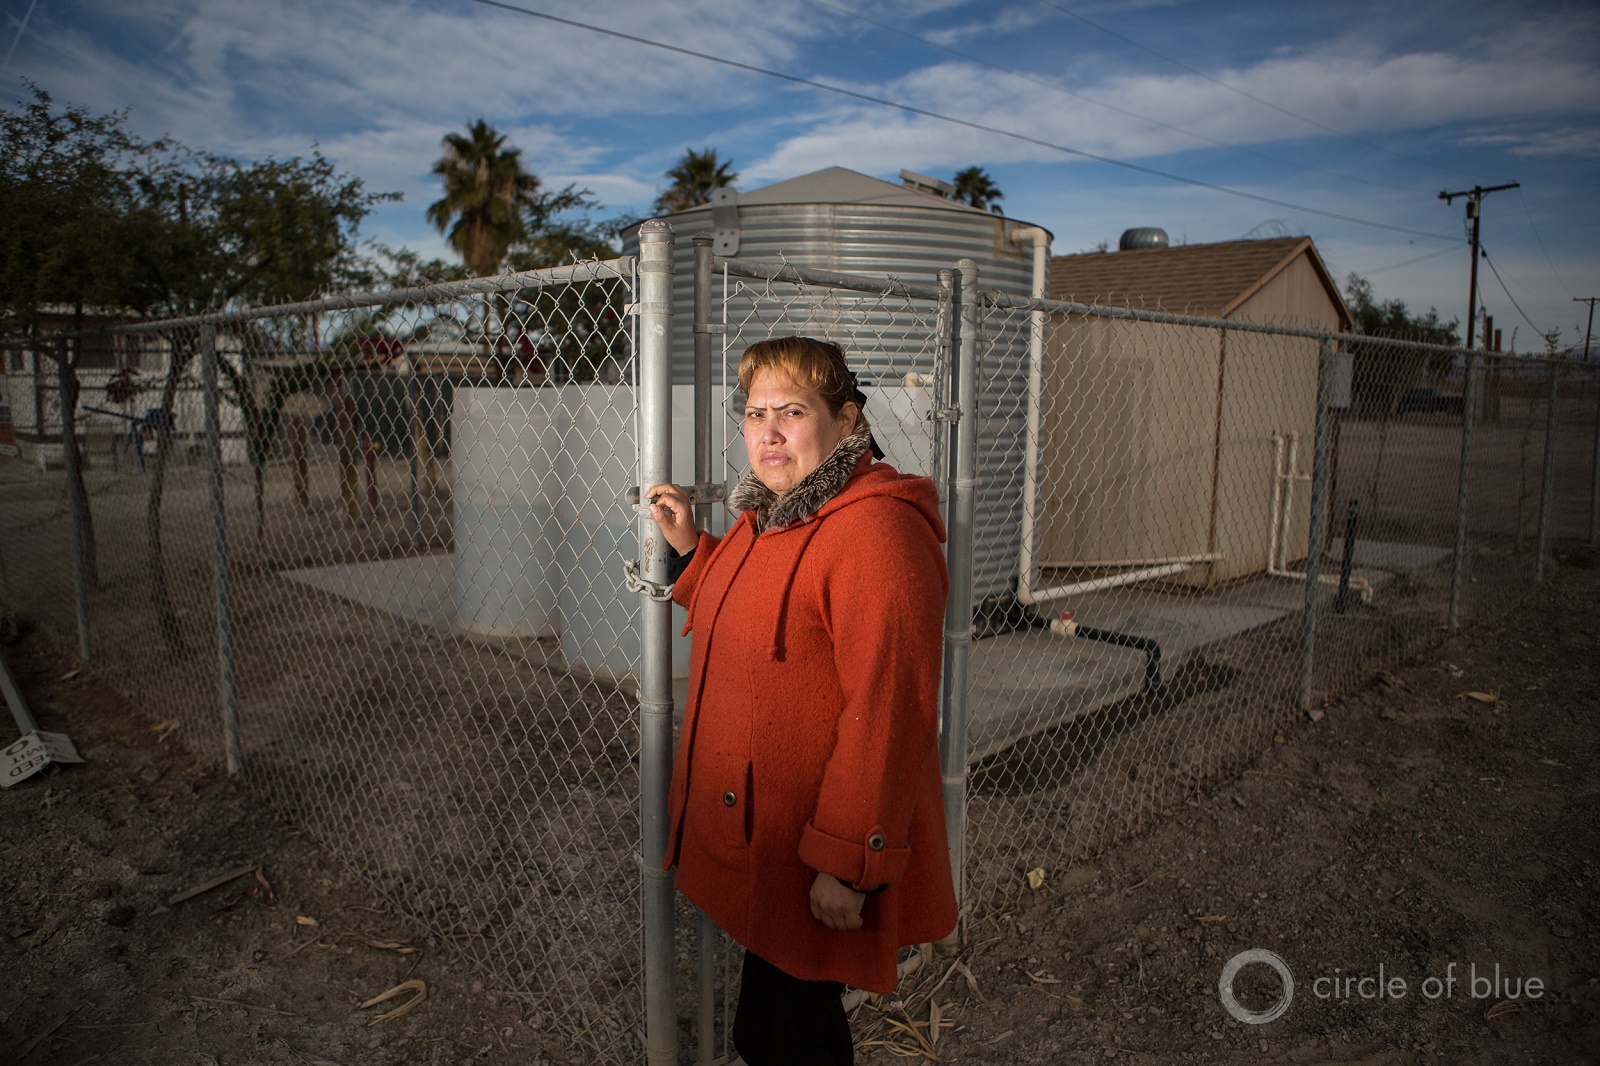 Migrant communities in southern California have to rely on unsafe groundwater supplies or drive to access clean supplies. A water filtration station in the Coachella Valley removes arsenic from groundwater. Photo © J. Carl Ganter / Circle of Blue